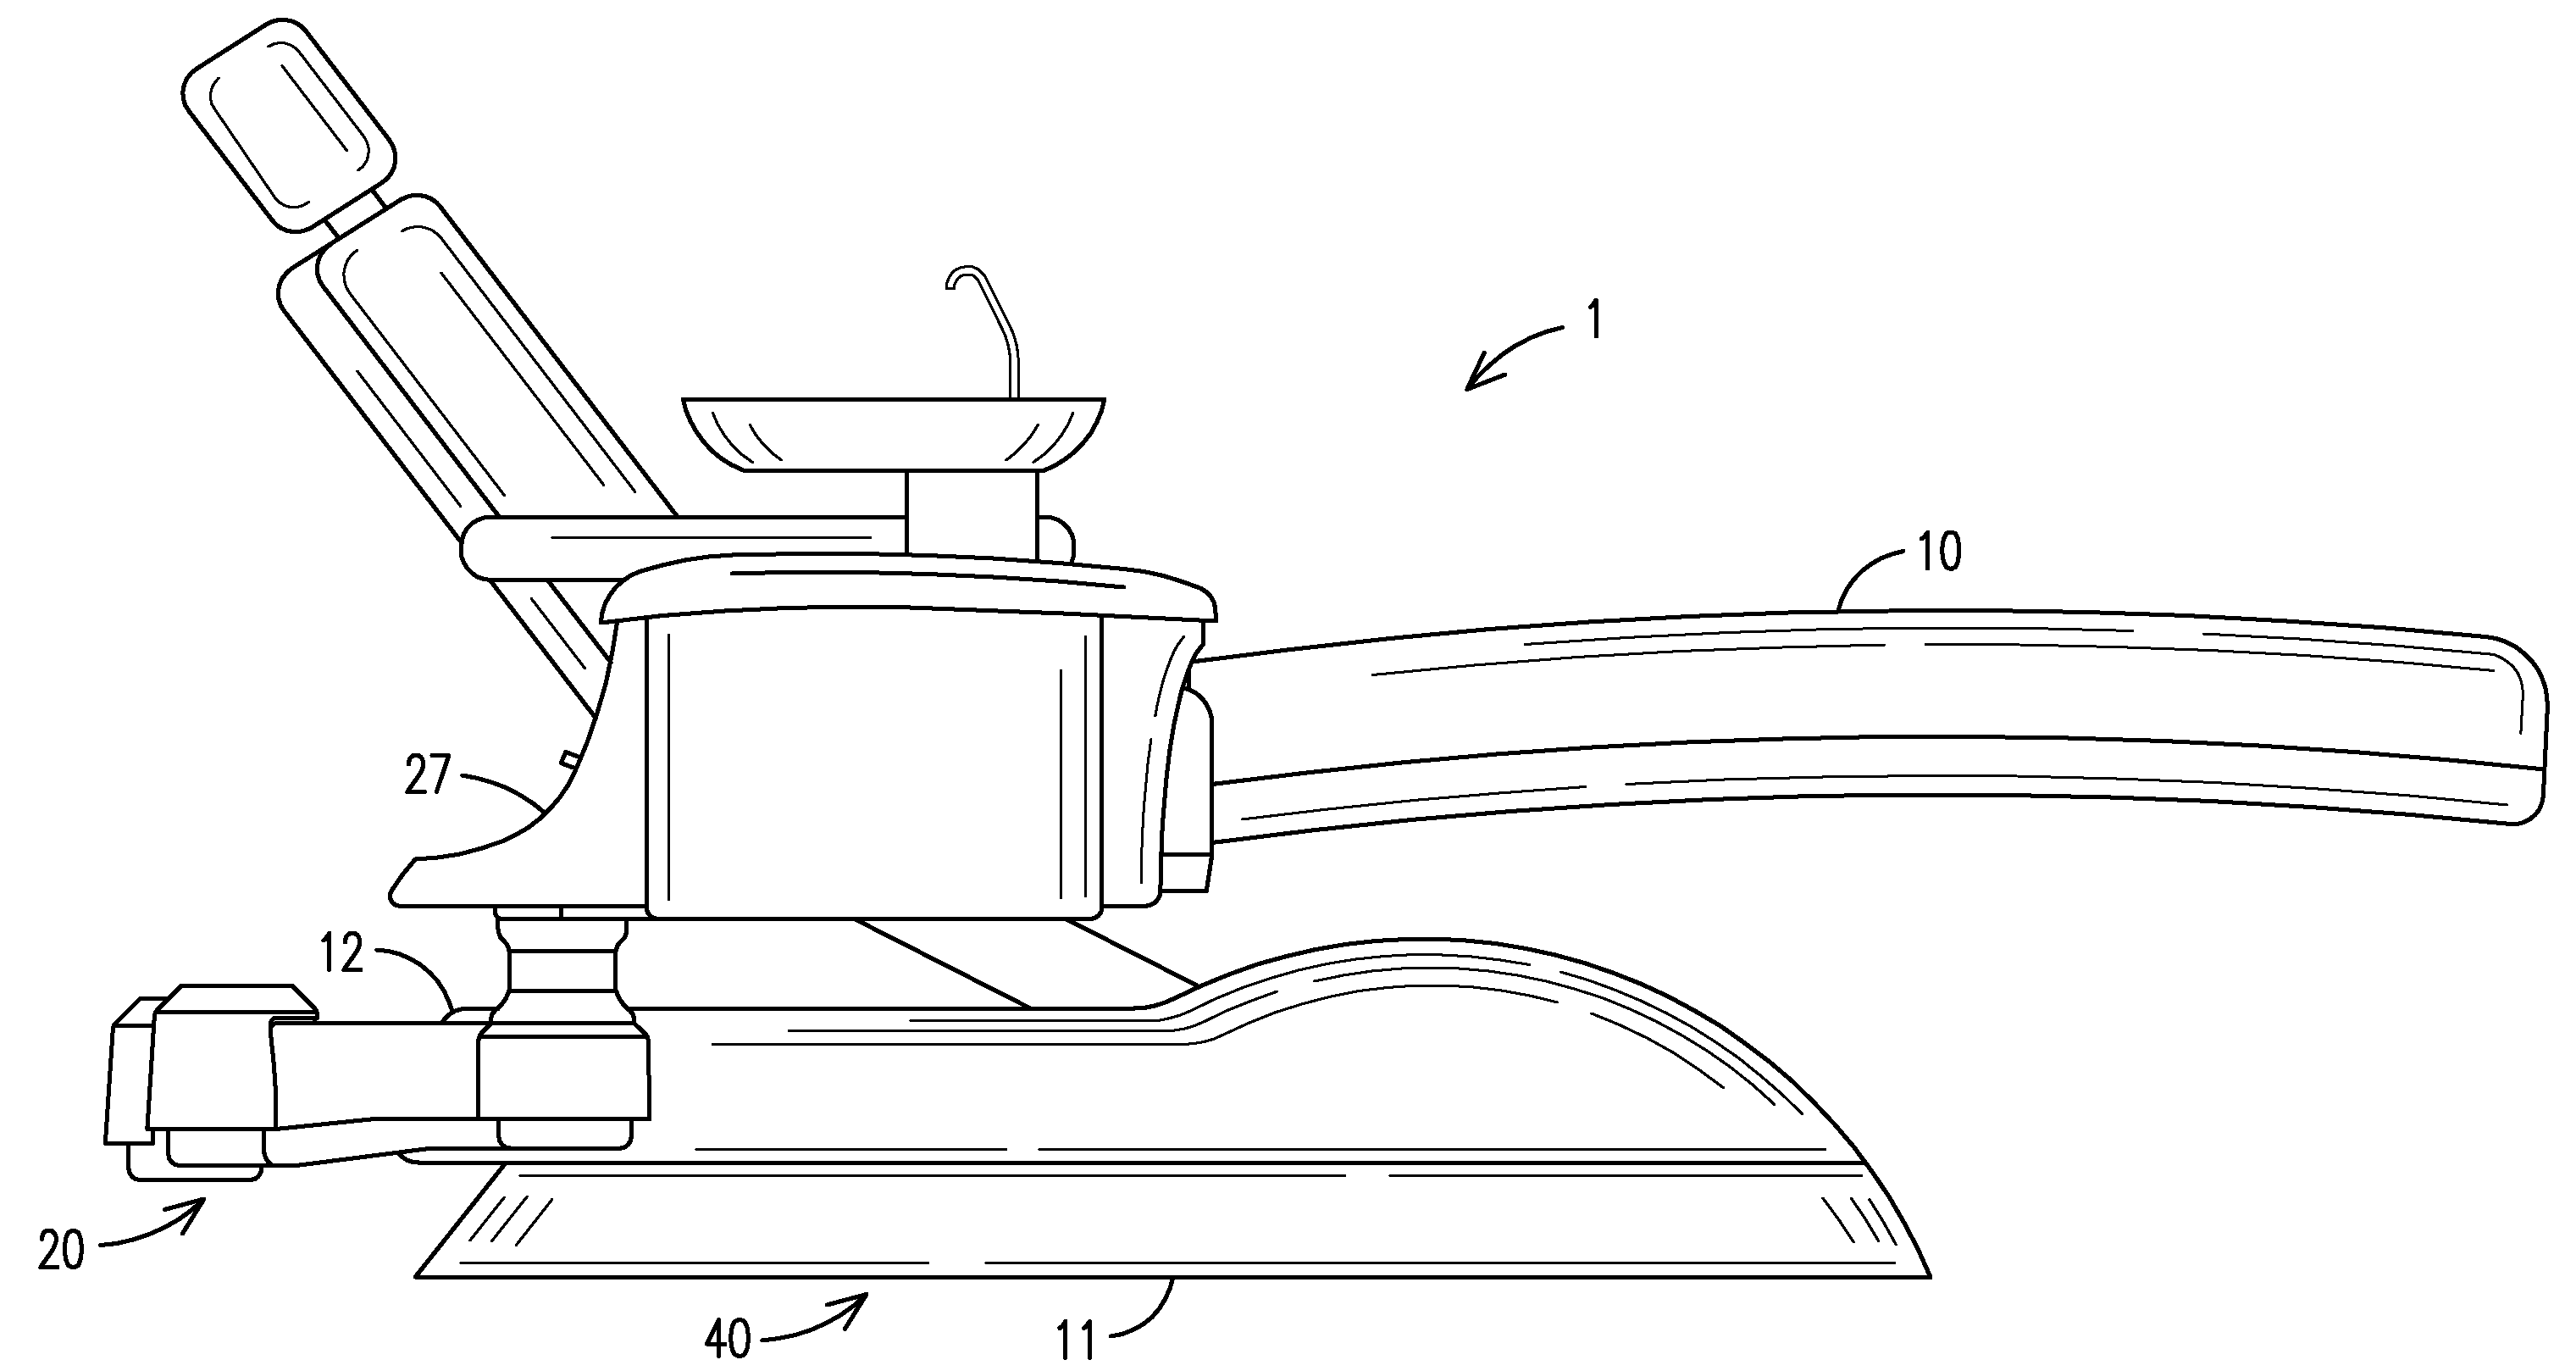 Dental Chair Having An Accessory Unit With An Adjustable Support Device